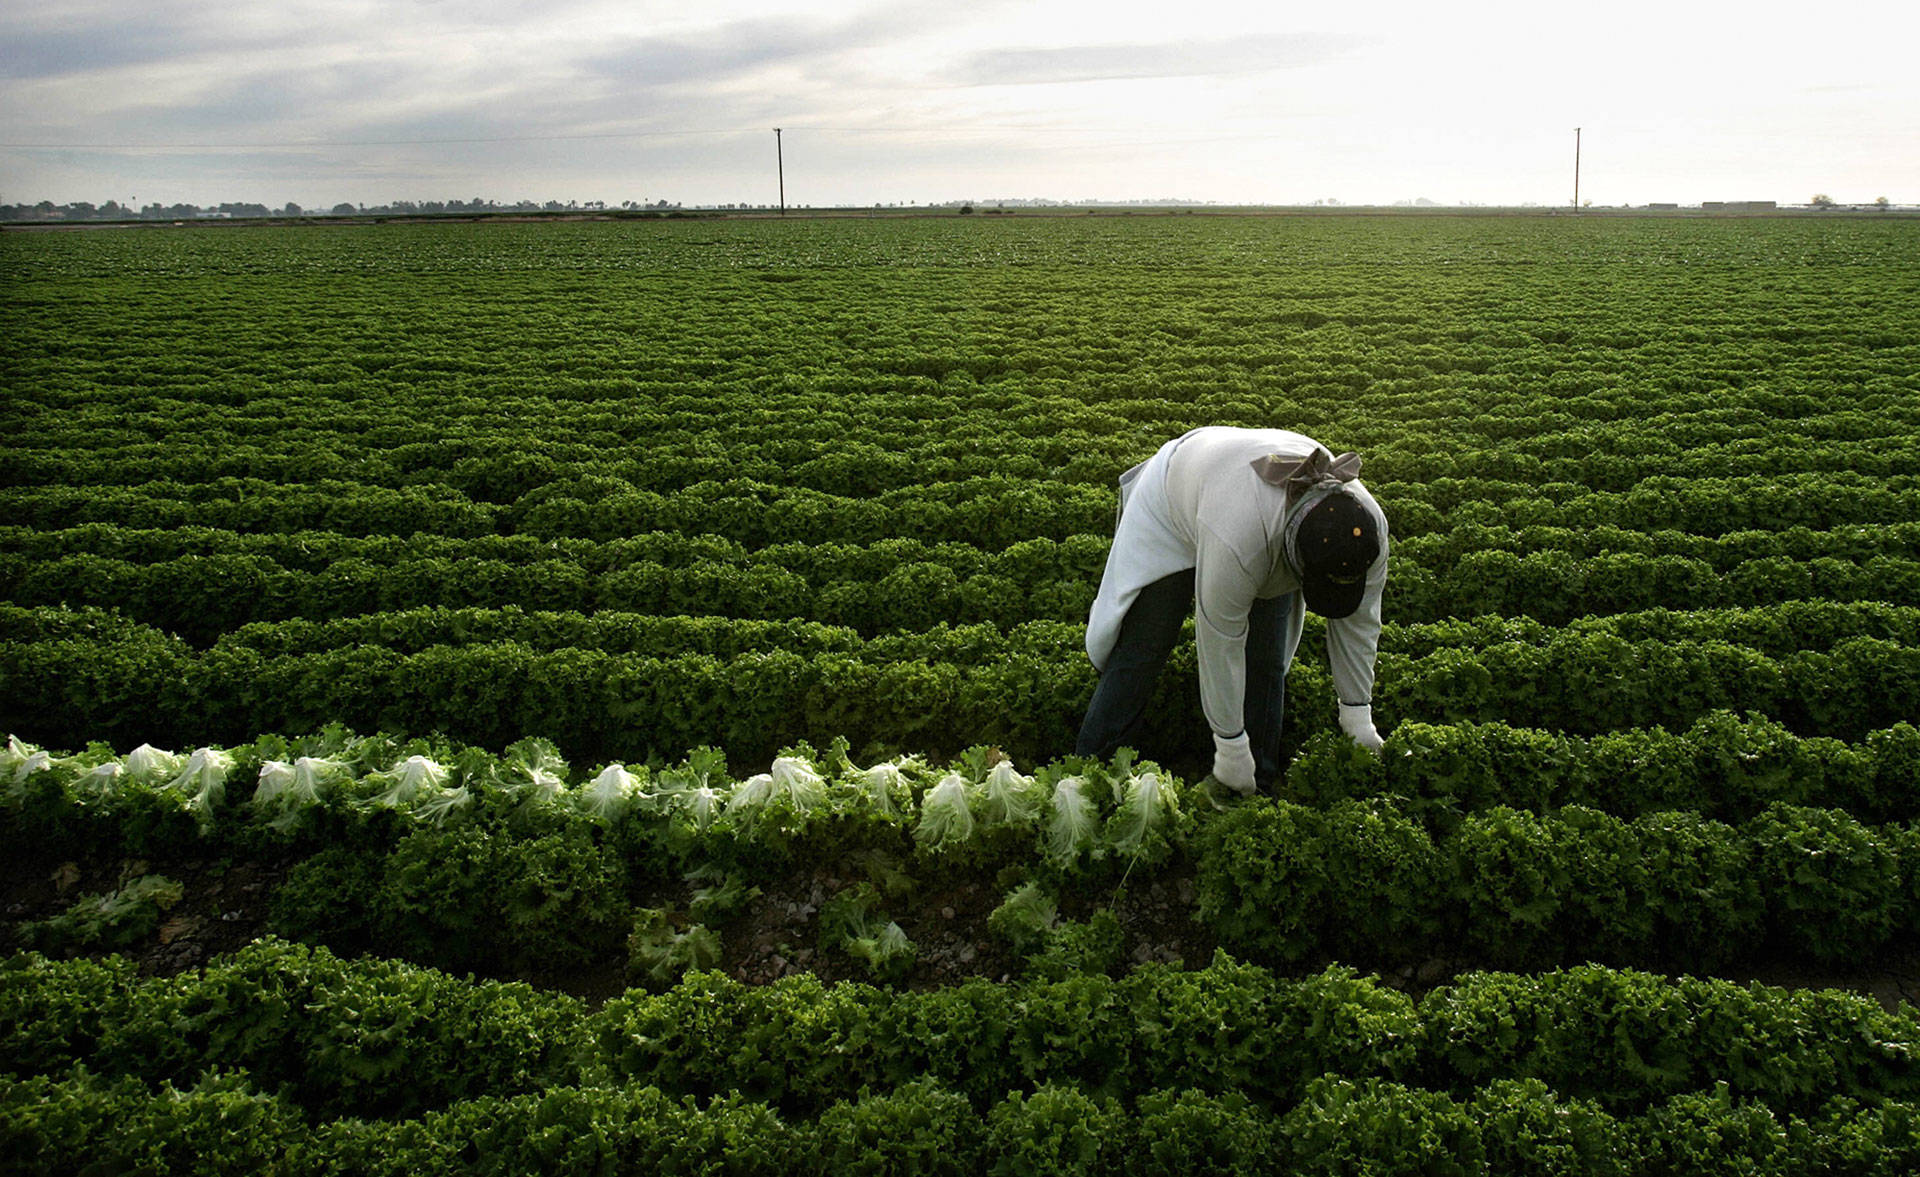 A farmworker harvests lettuce near Calexico. HECTOR MATA/AFP/Getty Images